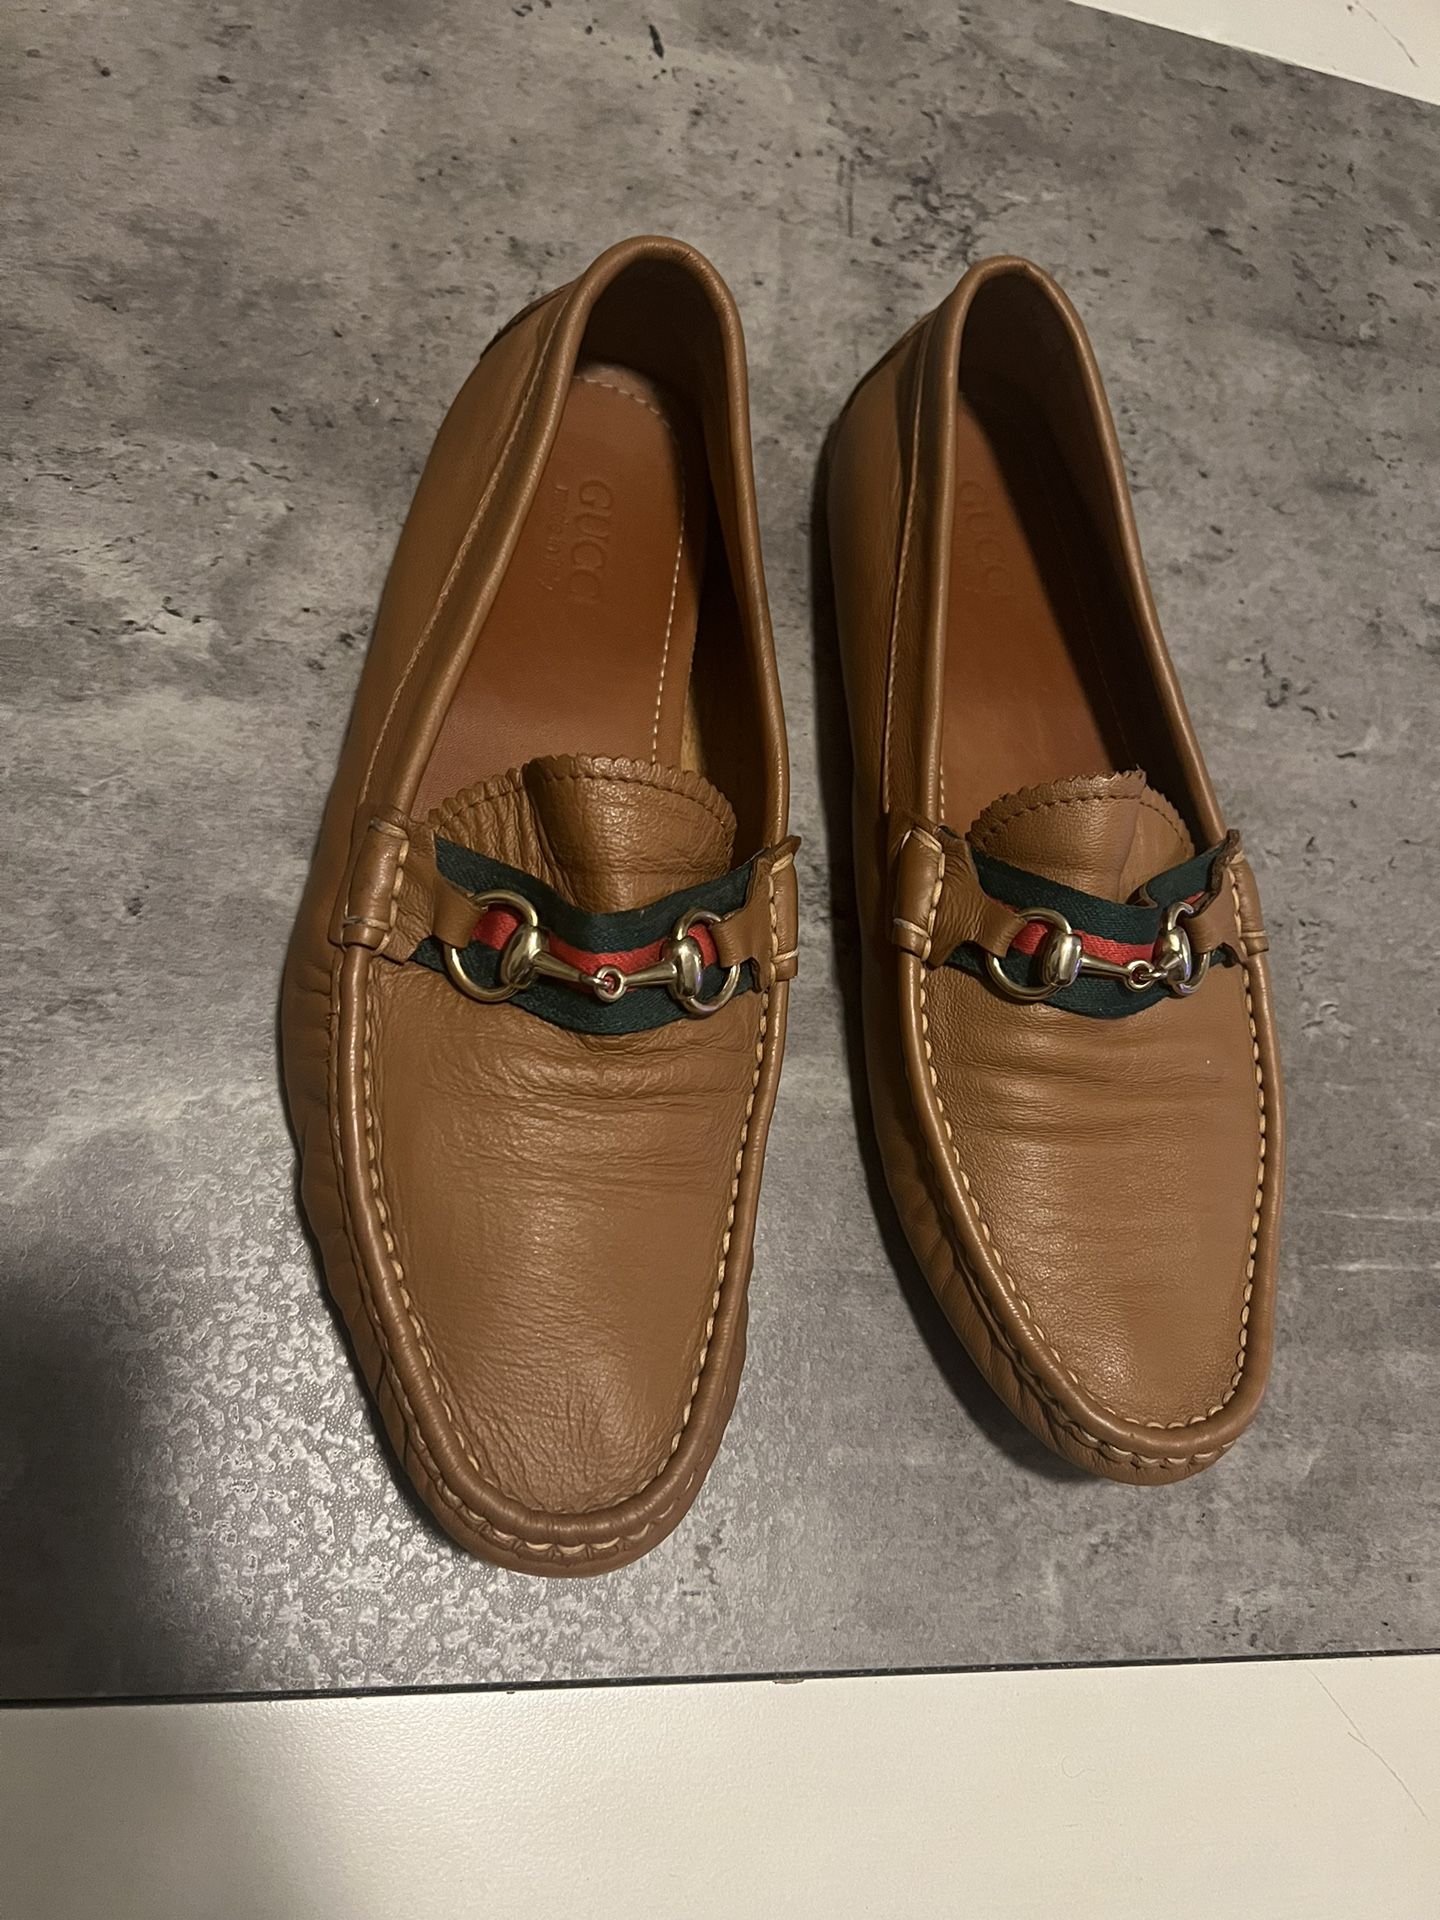 Gucci Men’s Loafers